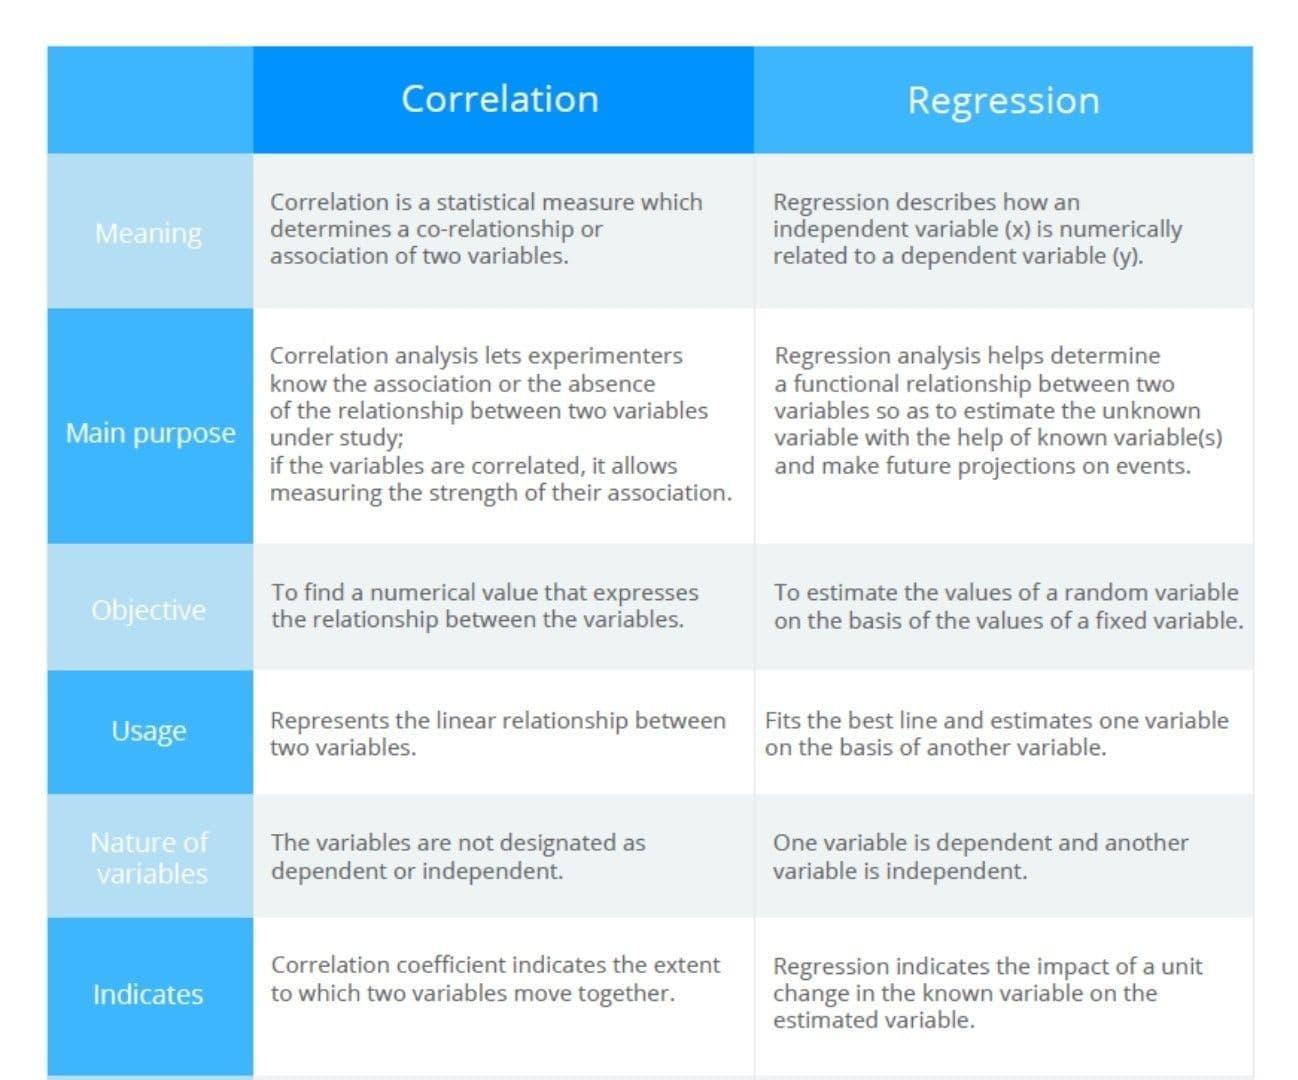 Difference Between Regression and Correlation in Data Mining